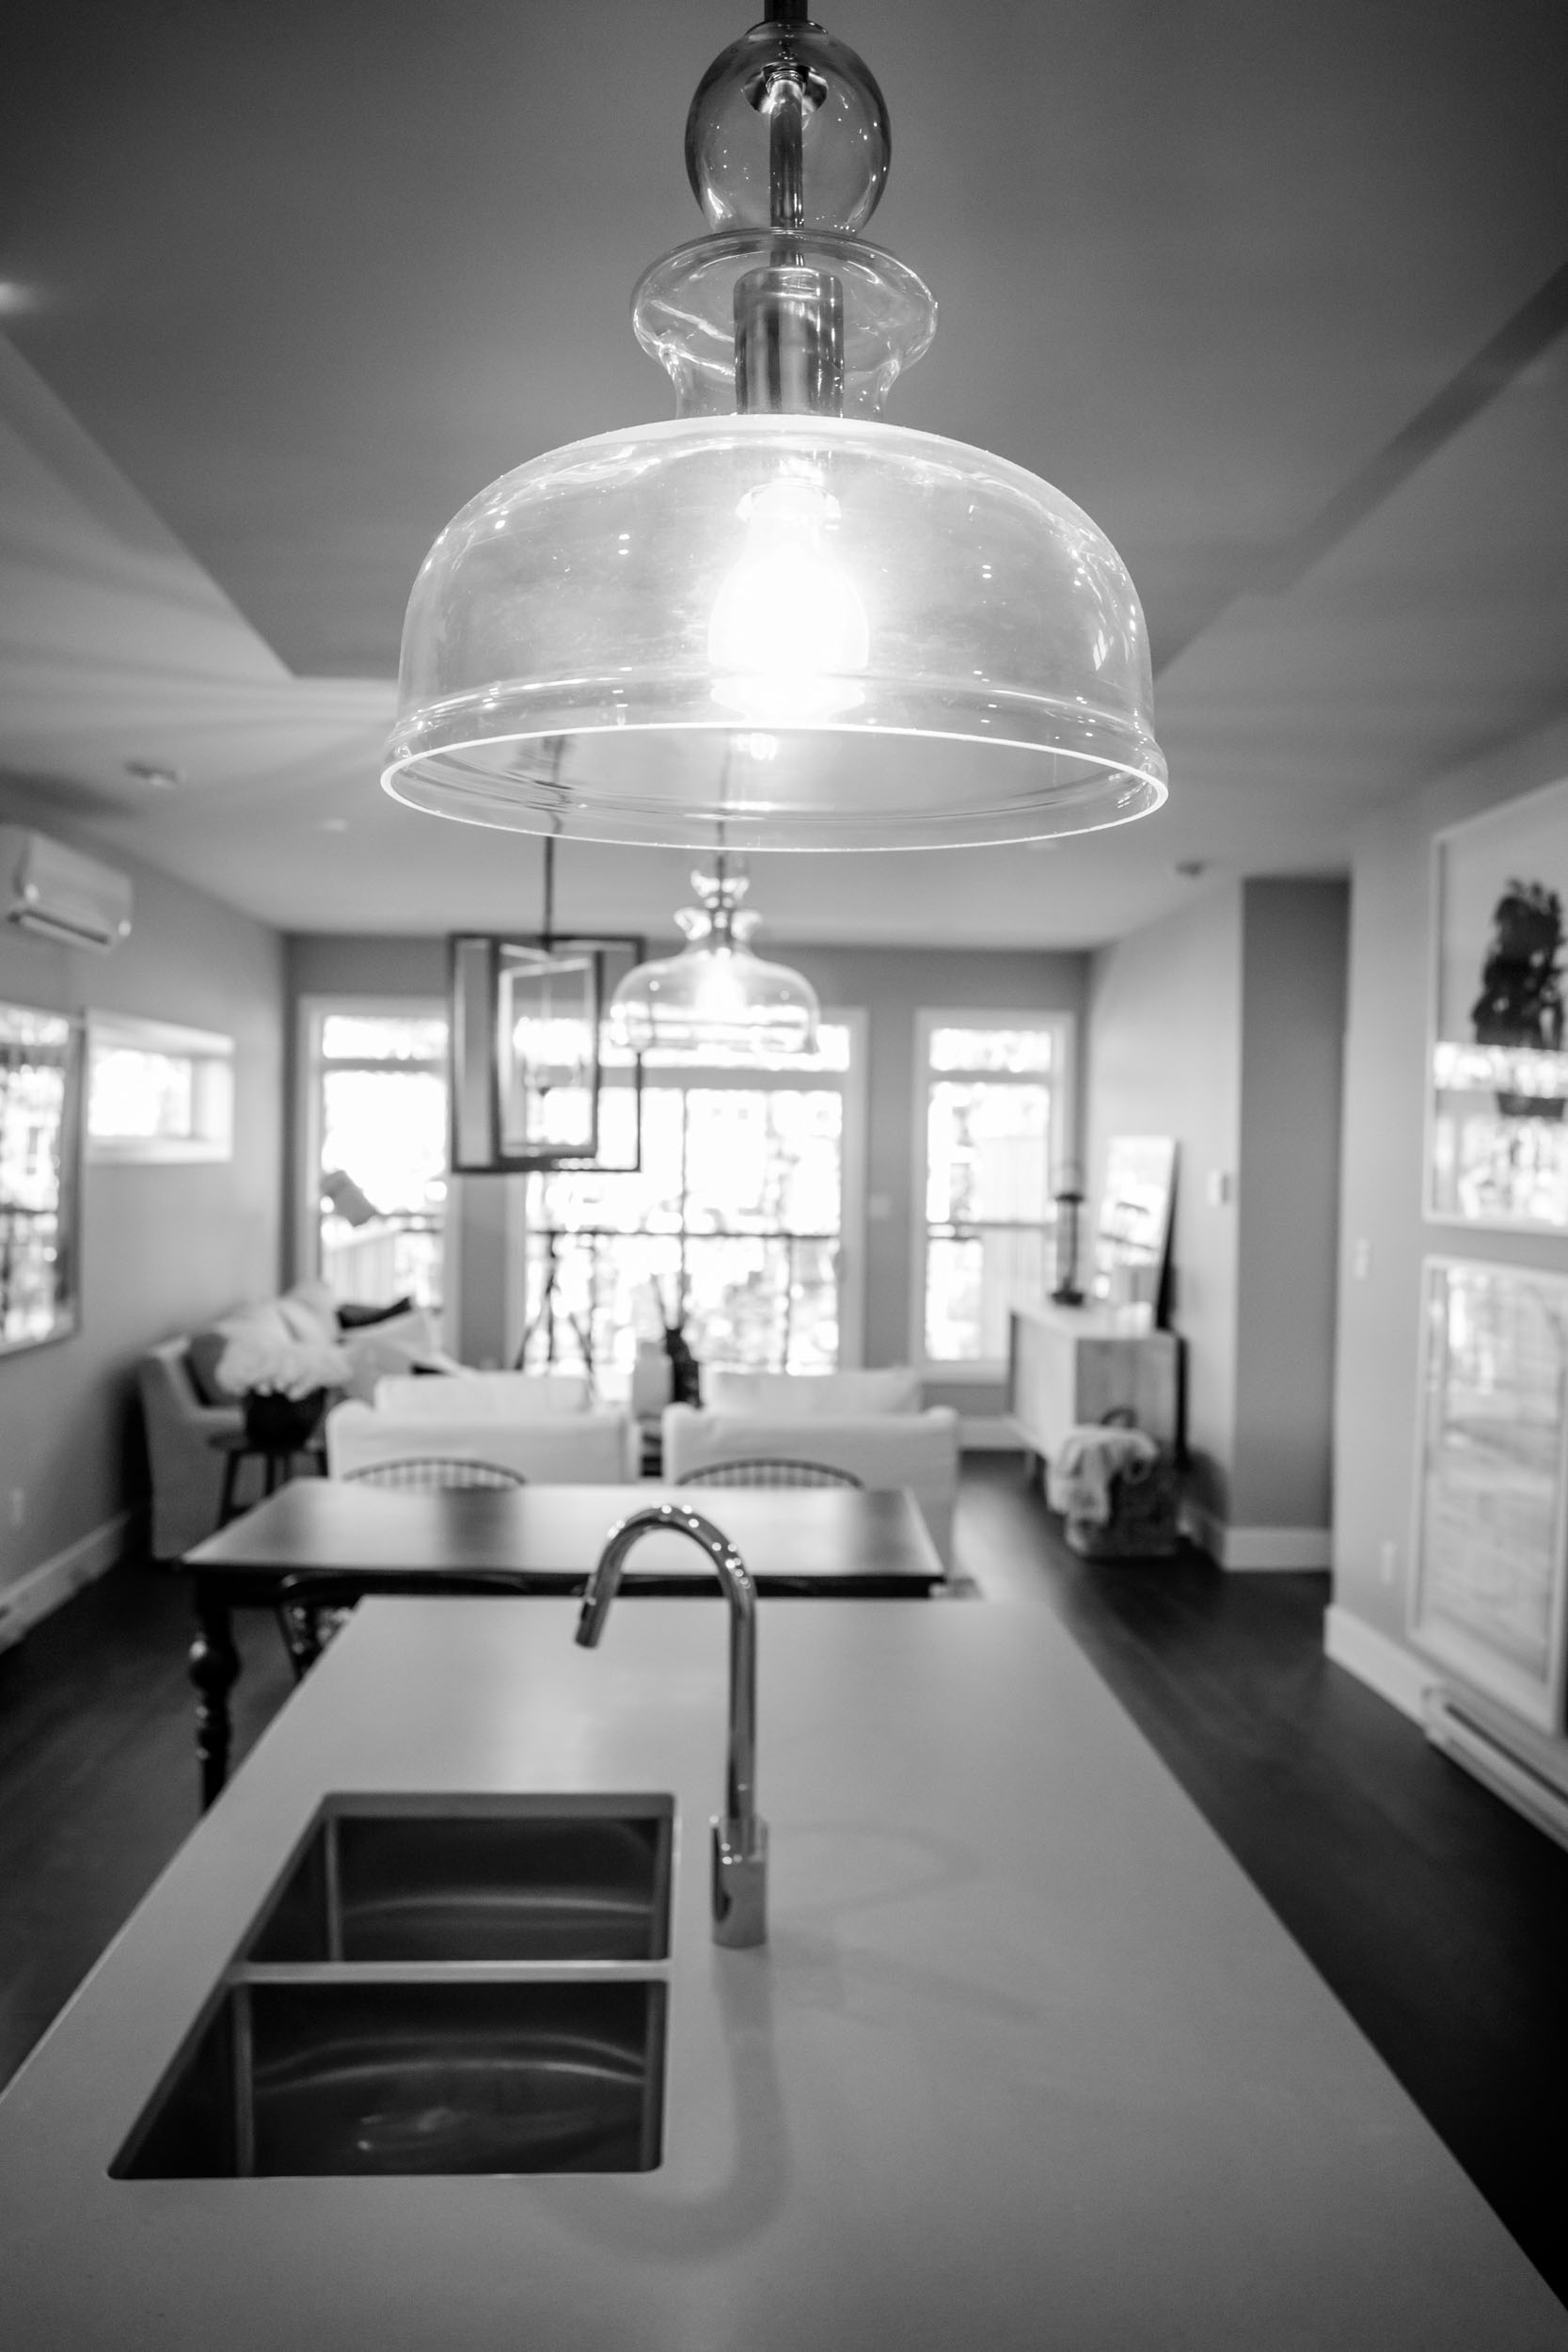 Henderson Electrical carefully considers the smallest design details - for example the careful placement of pendant lighting so no one bumps their head.